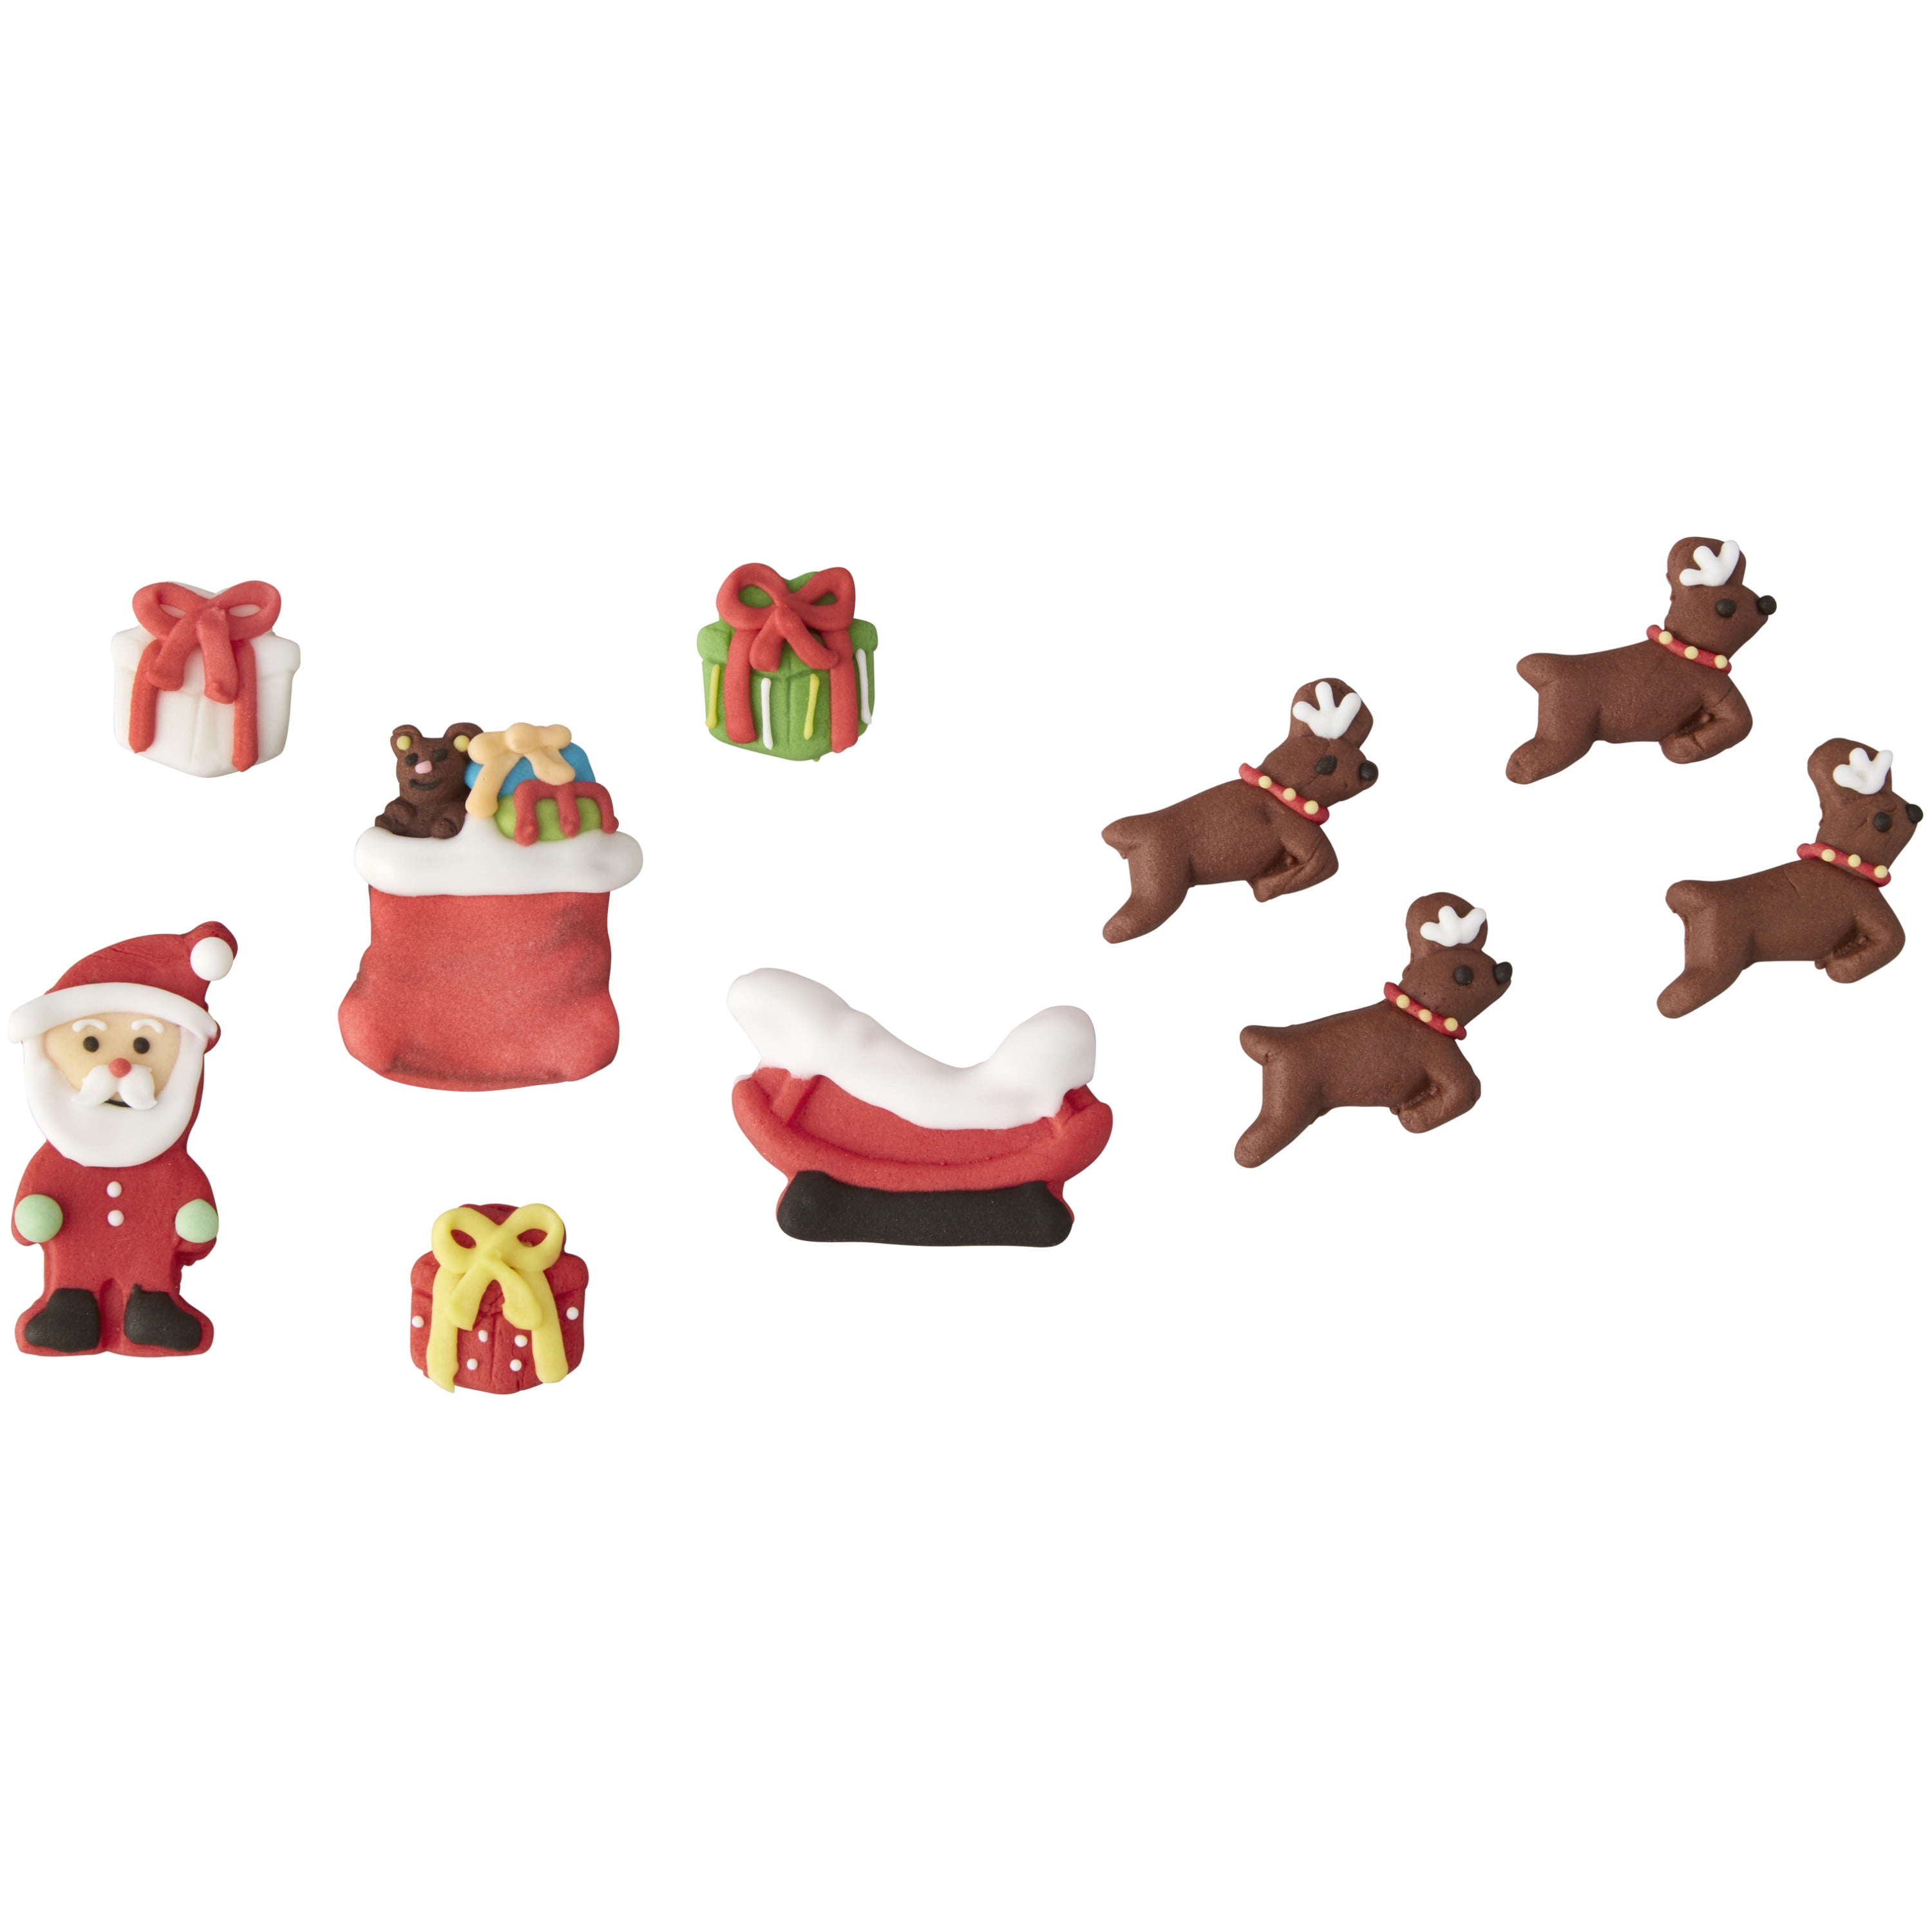 Wilton Gingerbread House Santa's Sleigh and Reindeer Icing Decorations, 10-Count